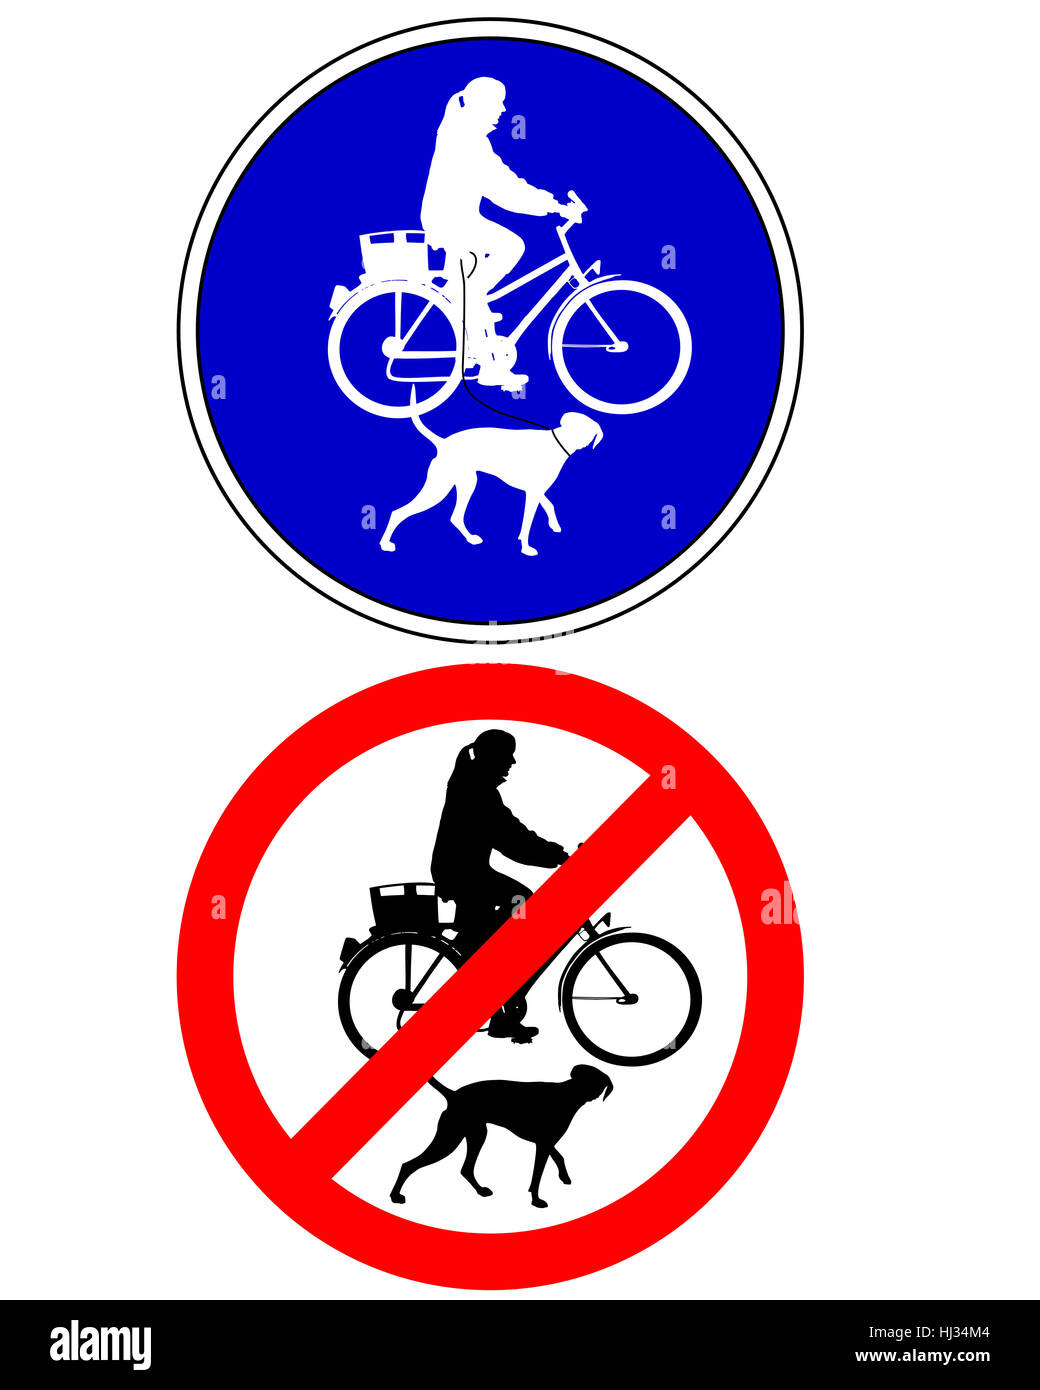 cycling road sign with dog Stock Photo